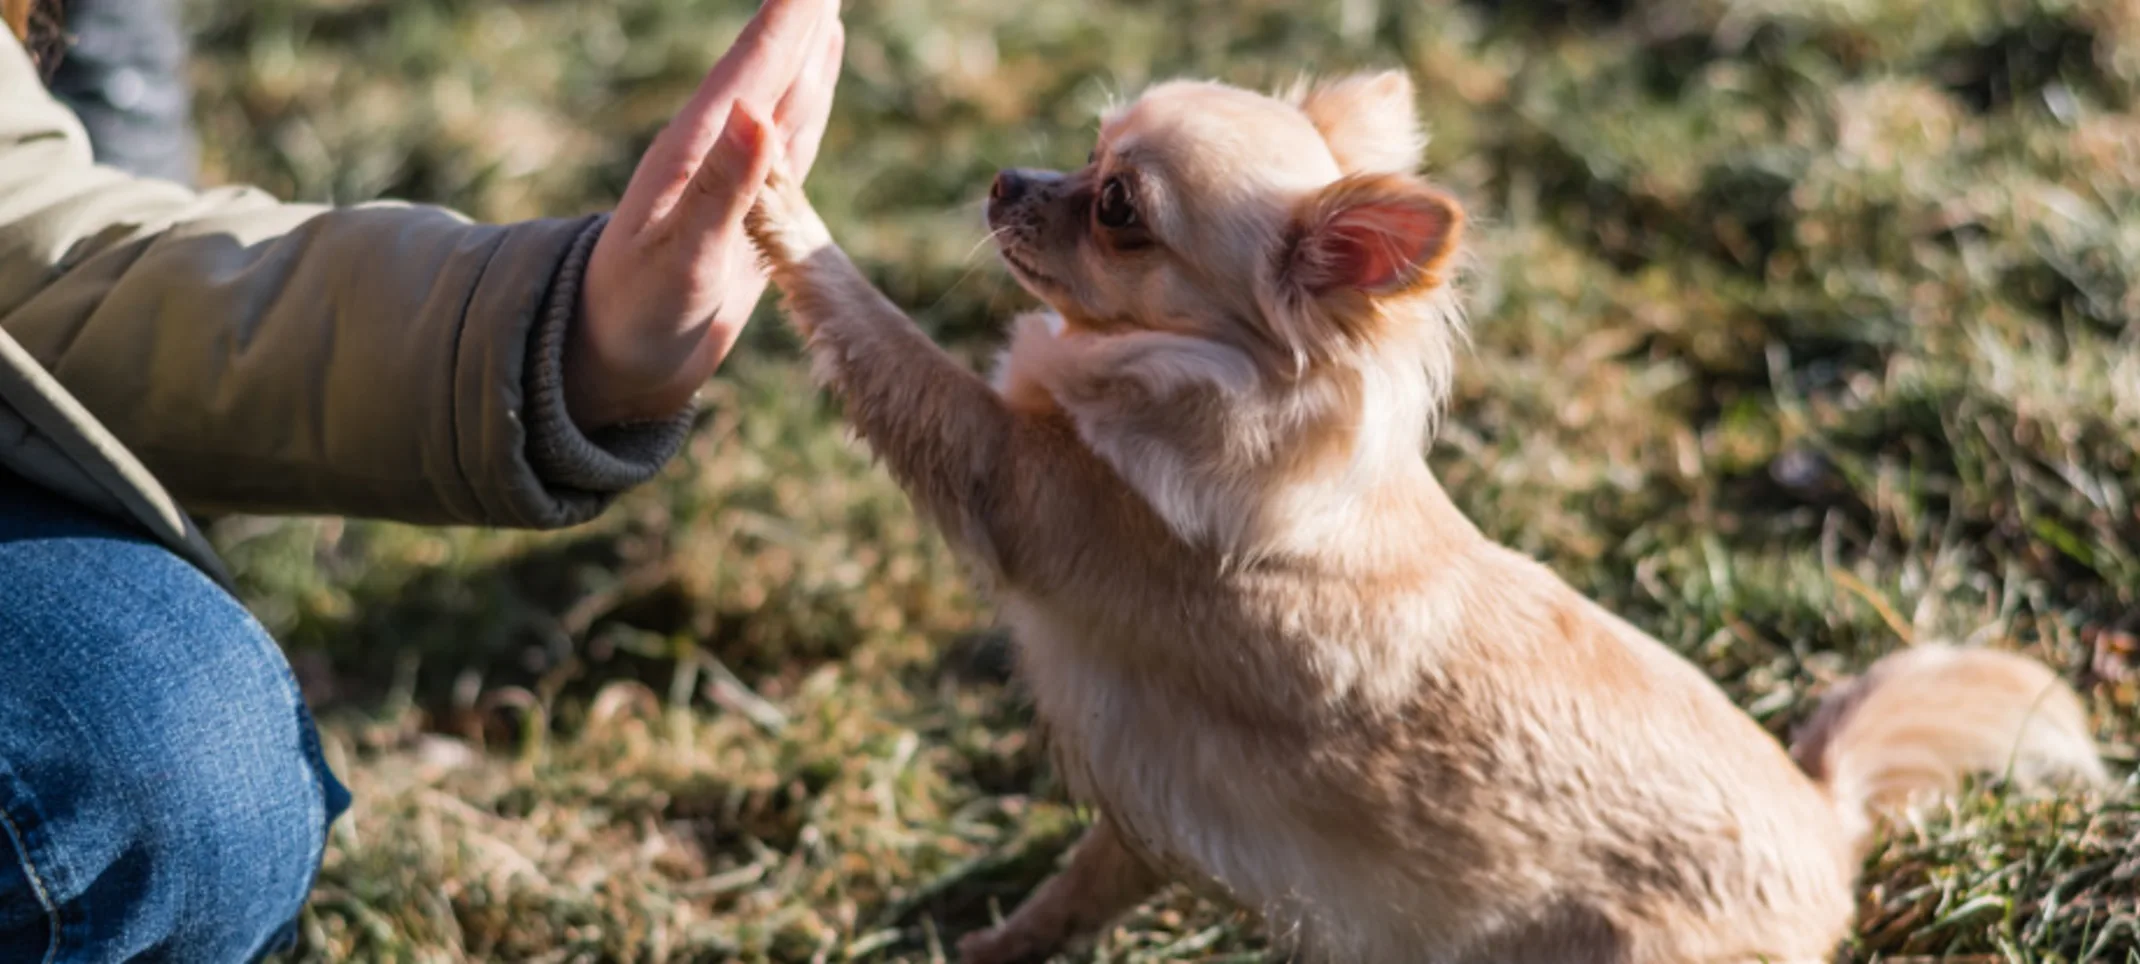 Owner Giving a Small Dog a High-Five